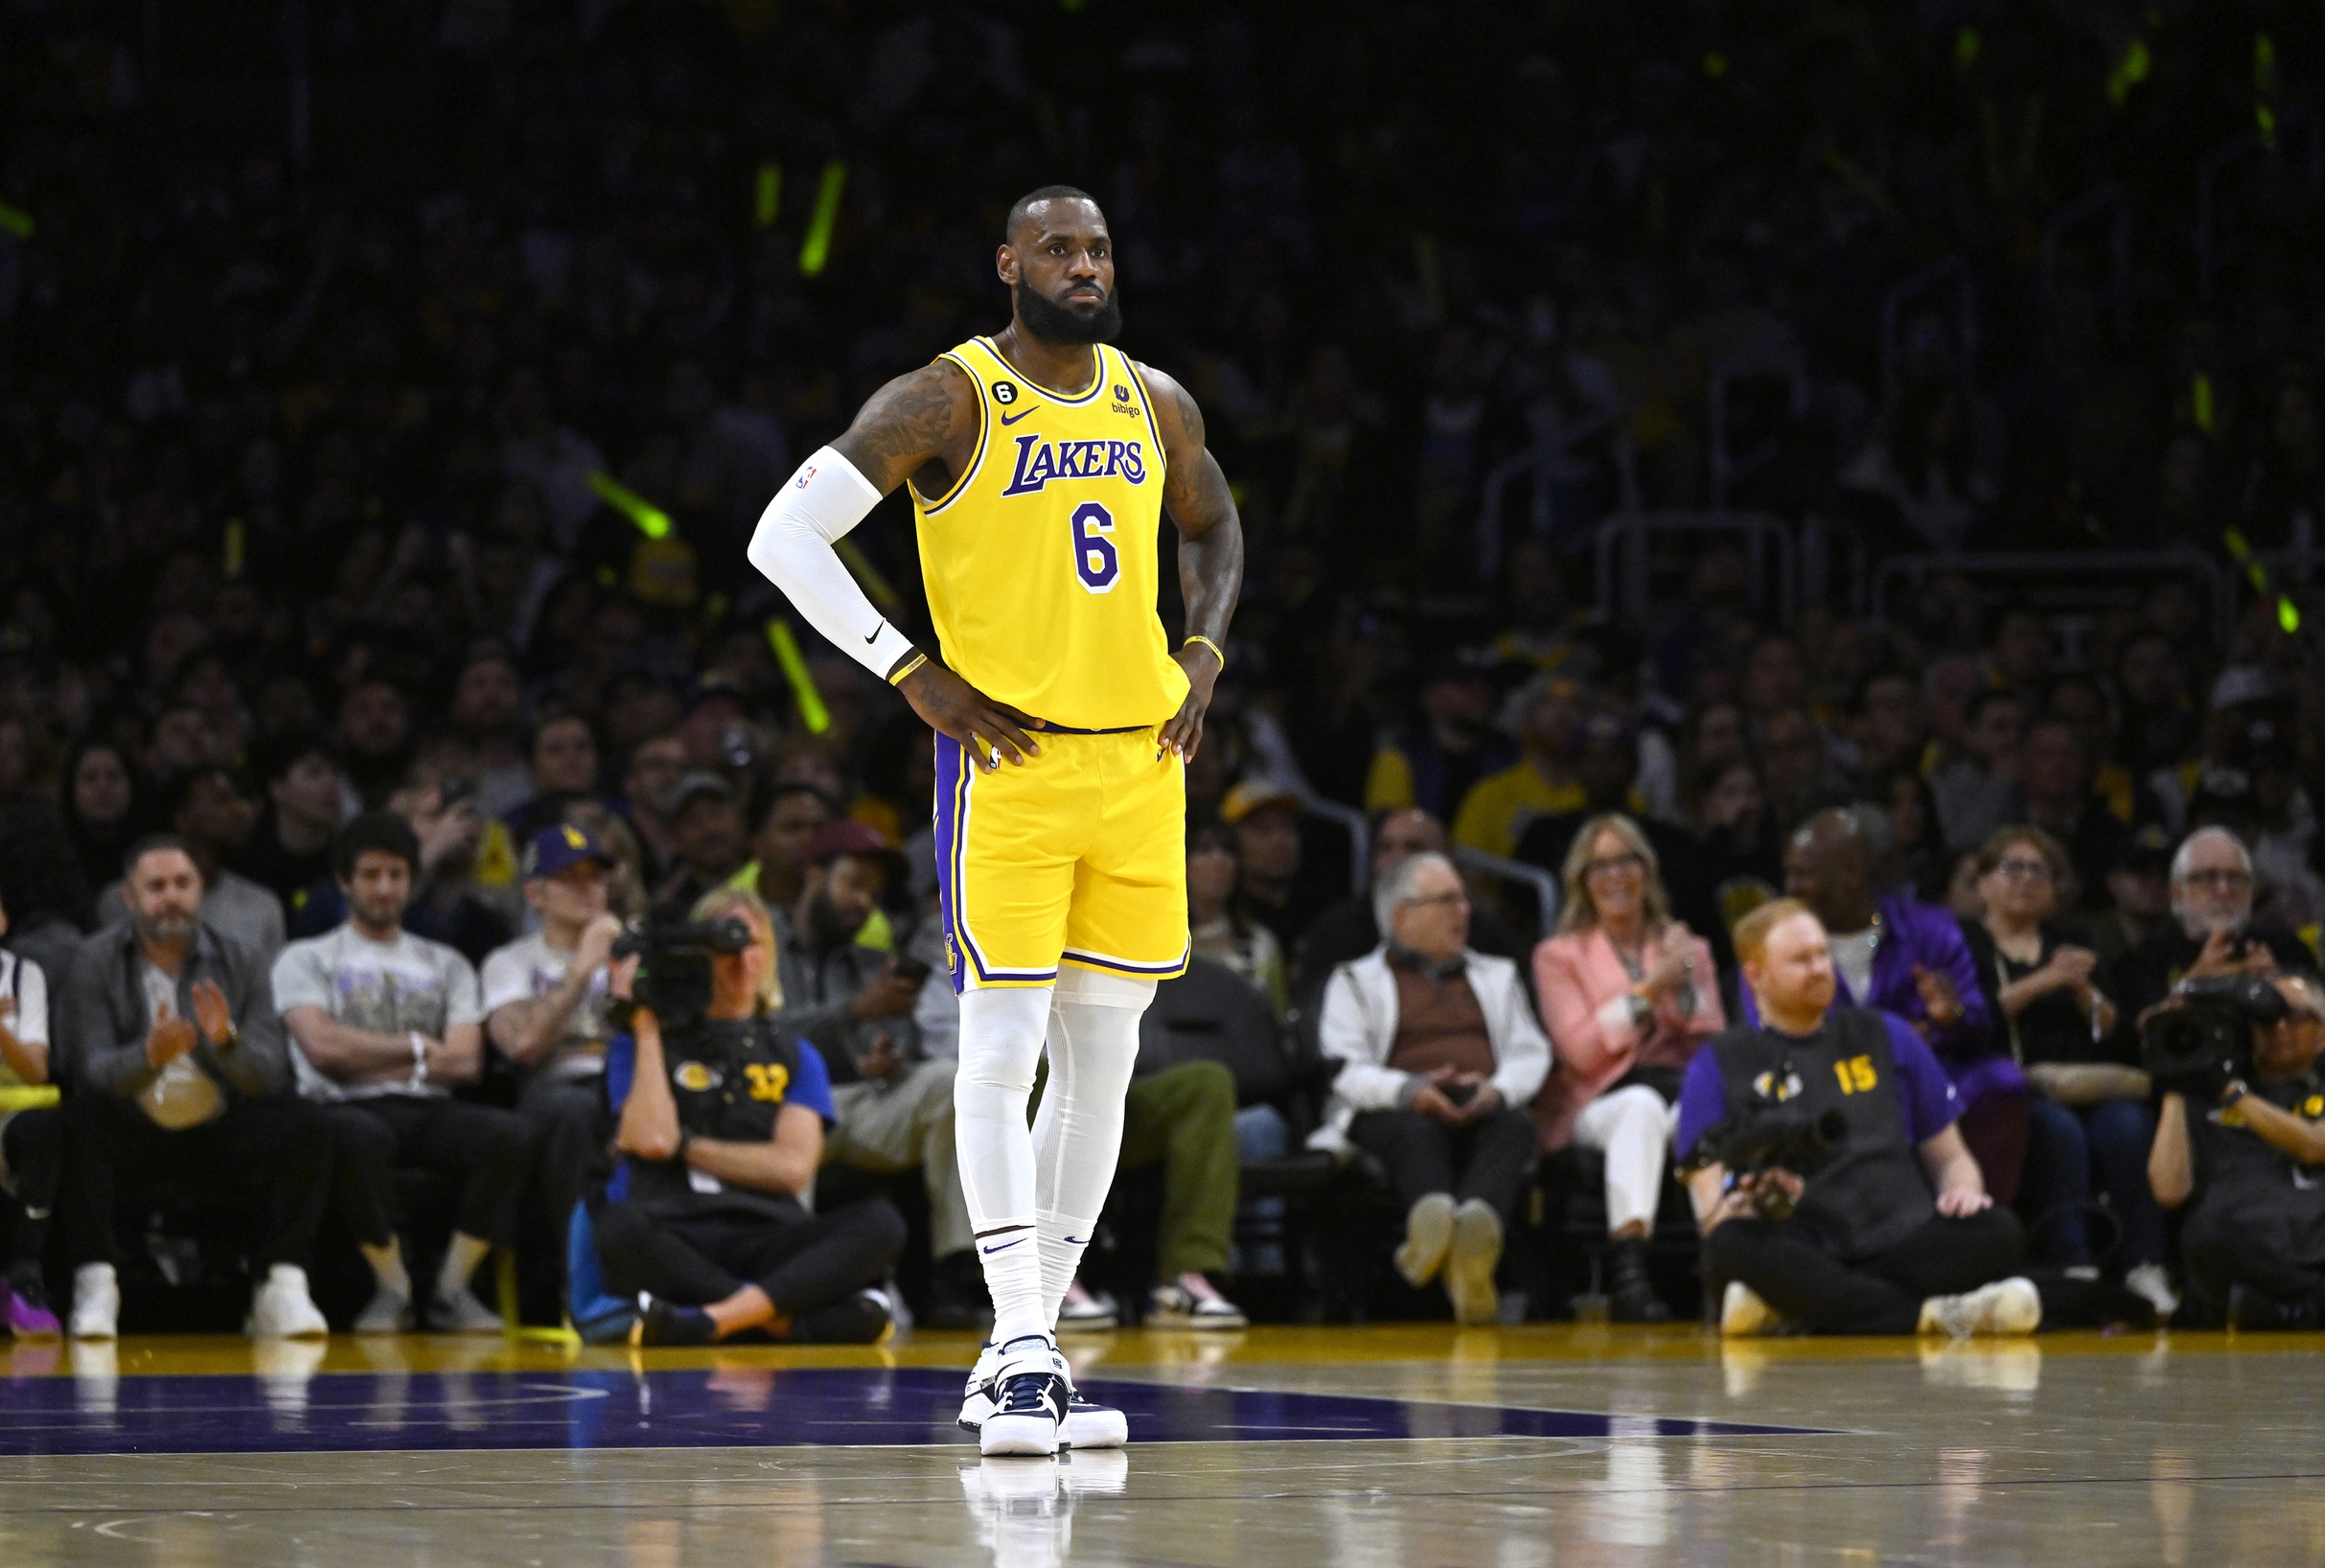 Los Angeles Lakers vs. Golden State Warriors series predictions LeBron James